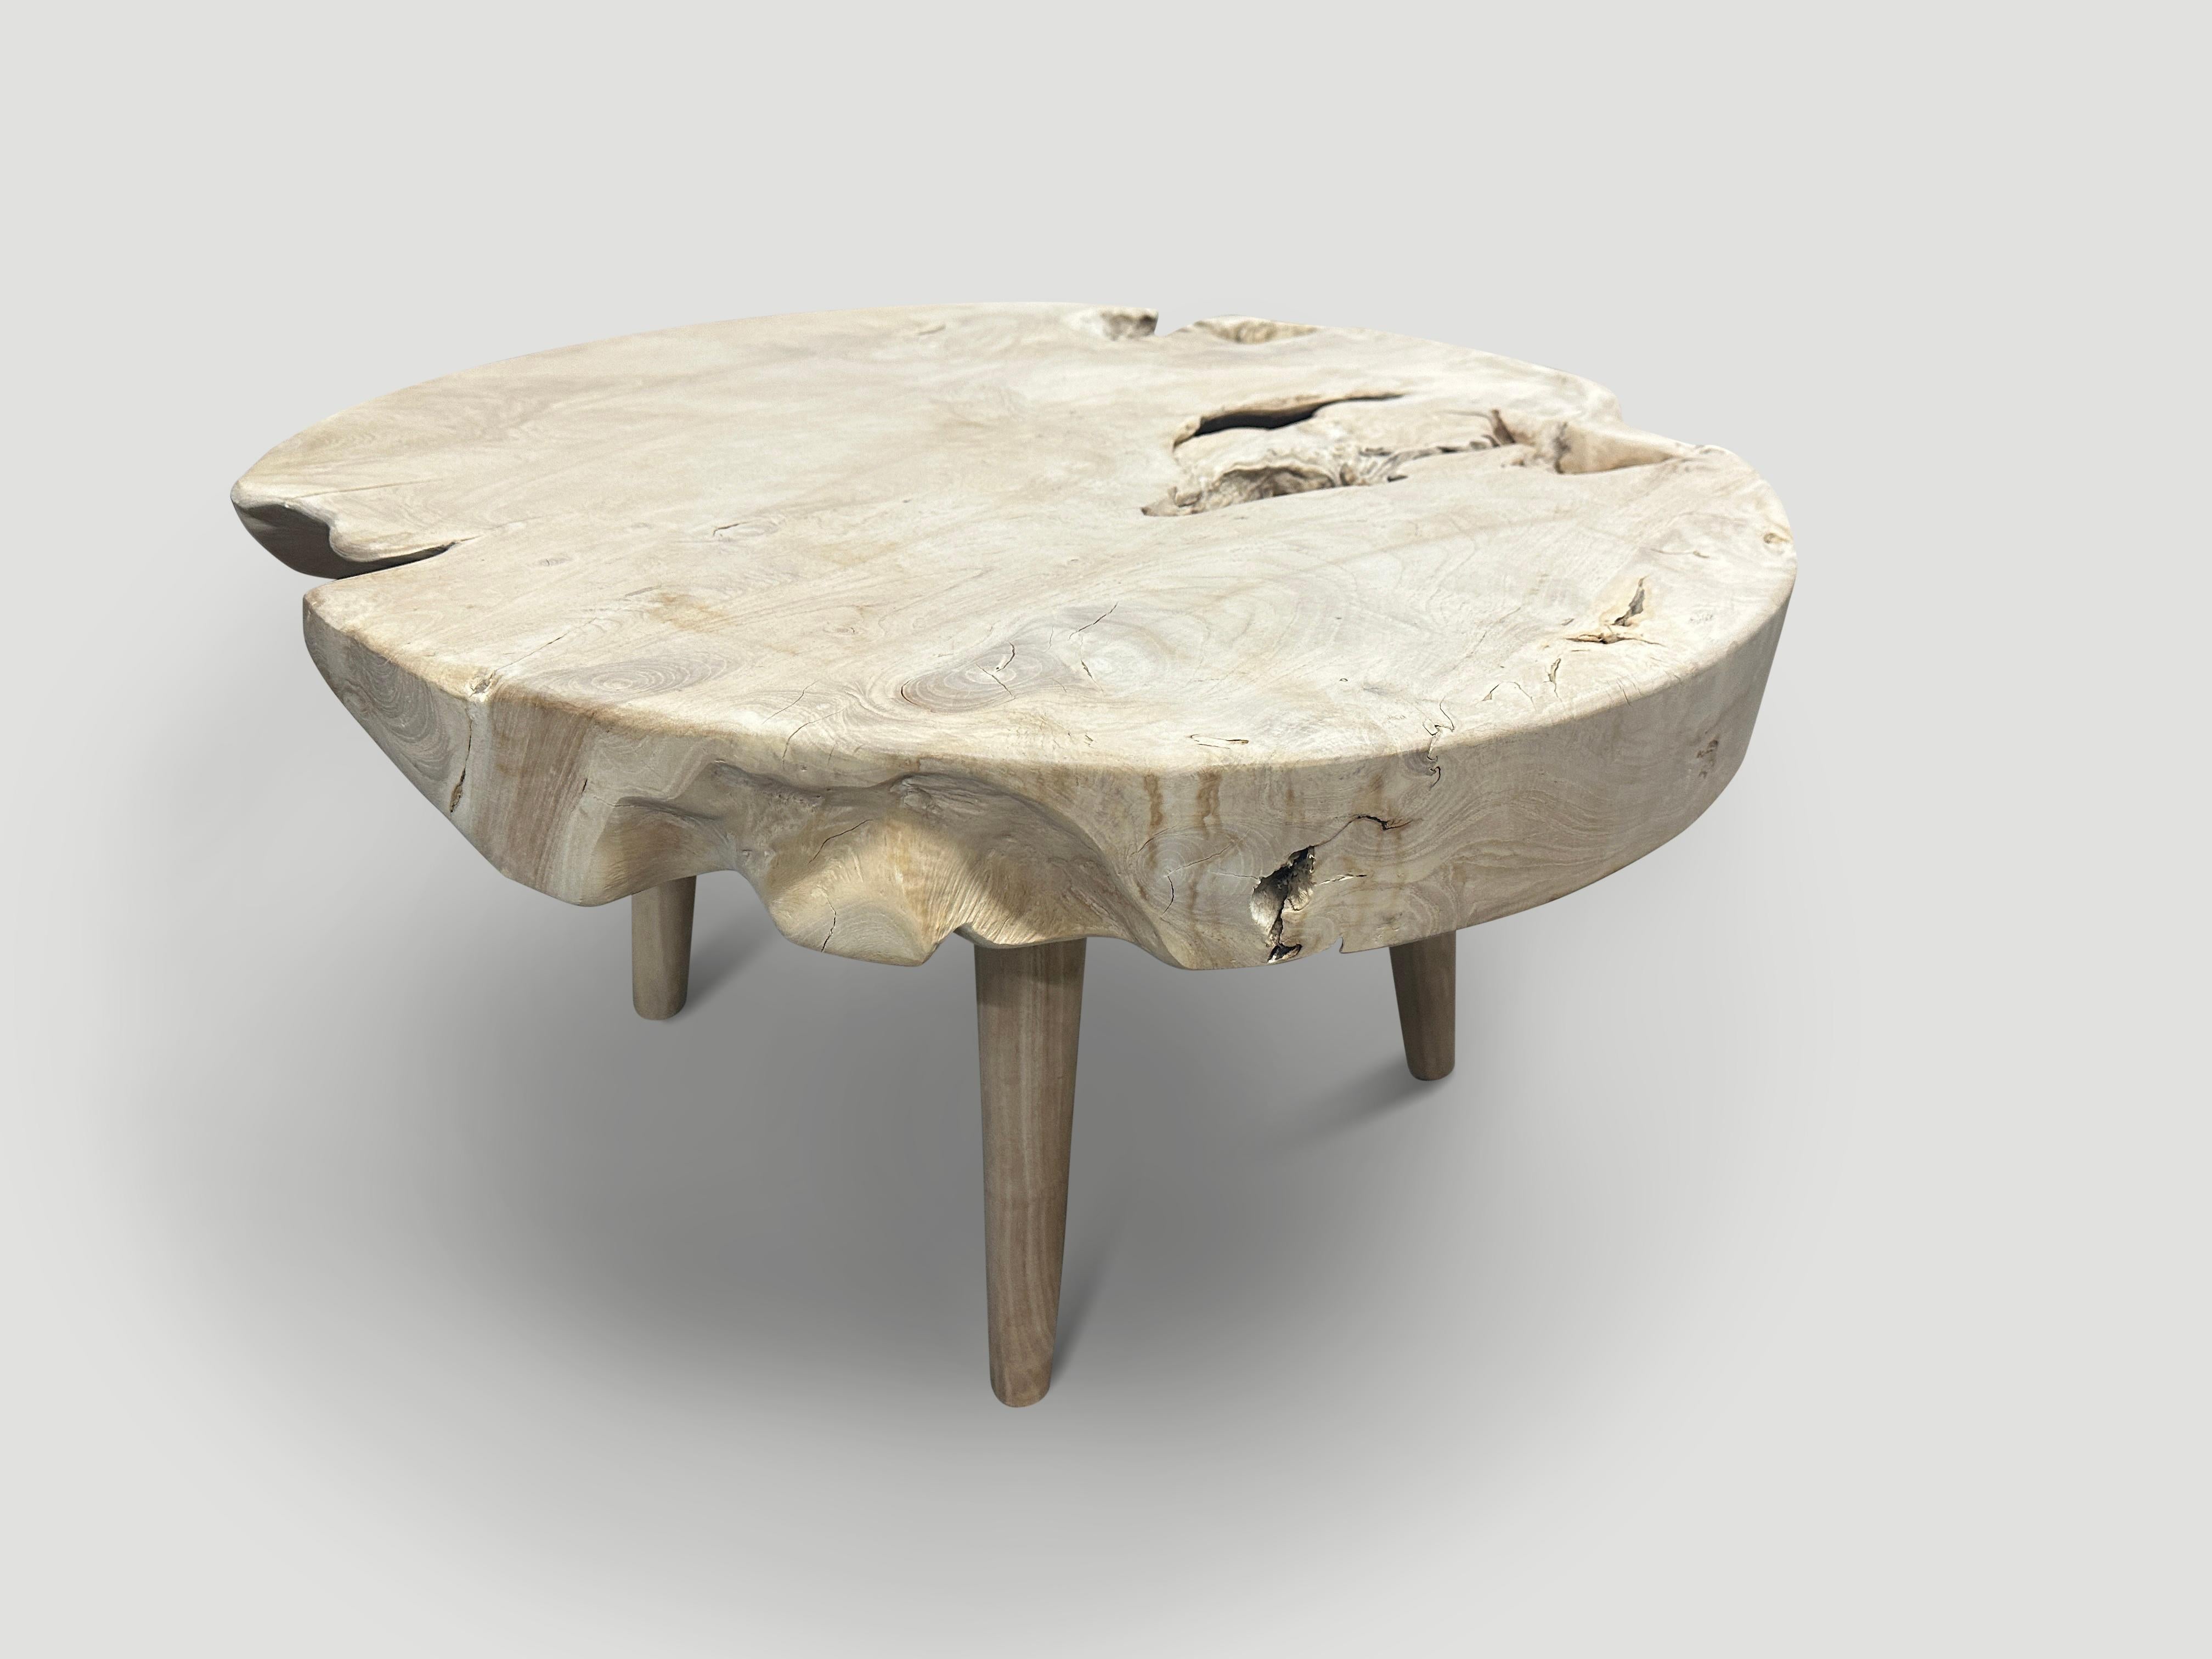 Impressive three inch single slab reclaimed teak wood coffee table. We bleached the teak and added a light white wash revealing the beautiful wood grain. Floating on mid century style legs. Organic with a twist. It’s all in the details. We have a